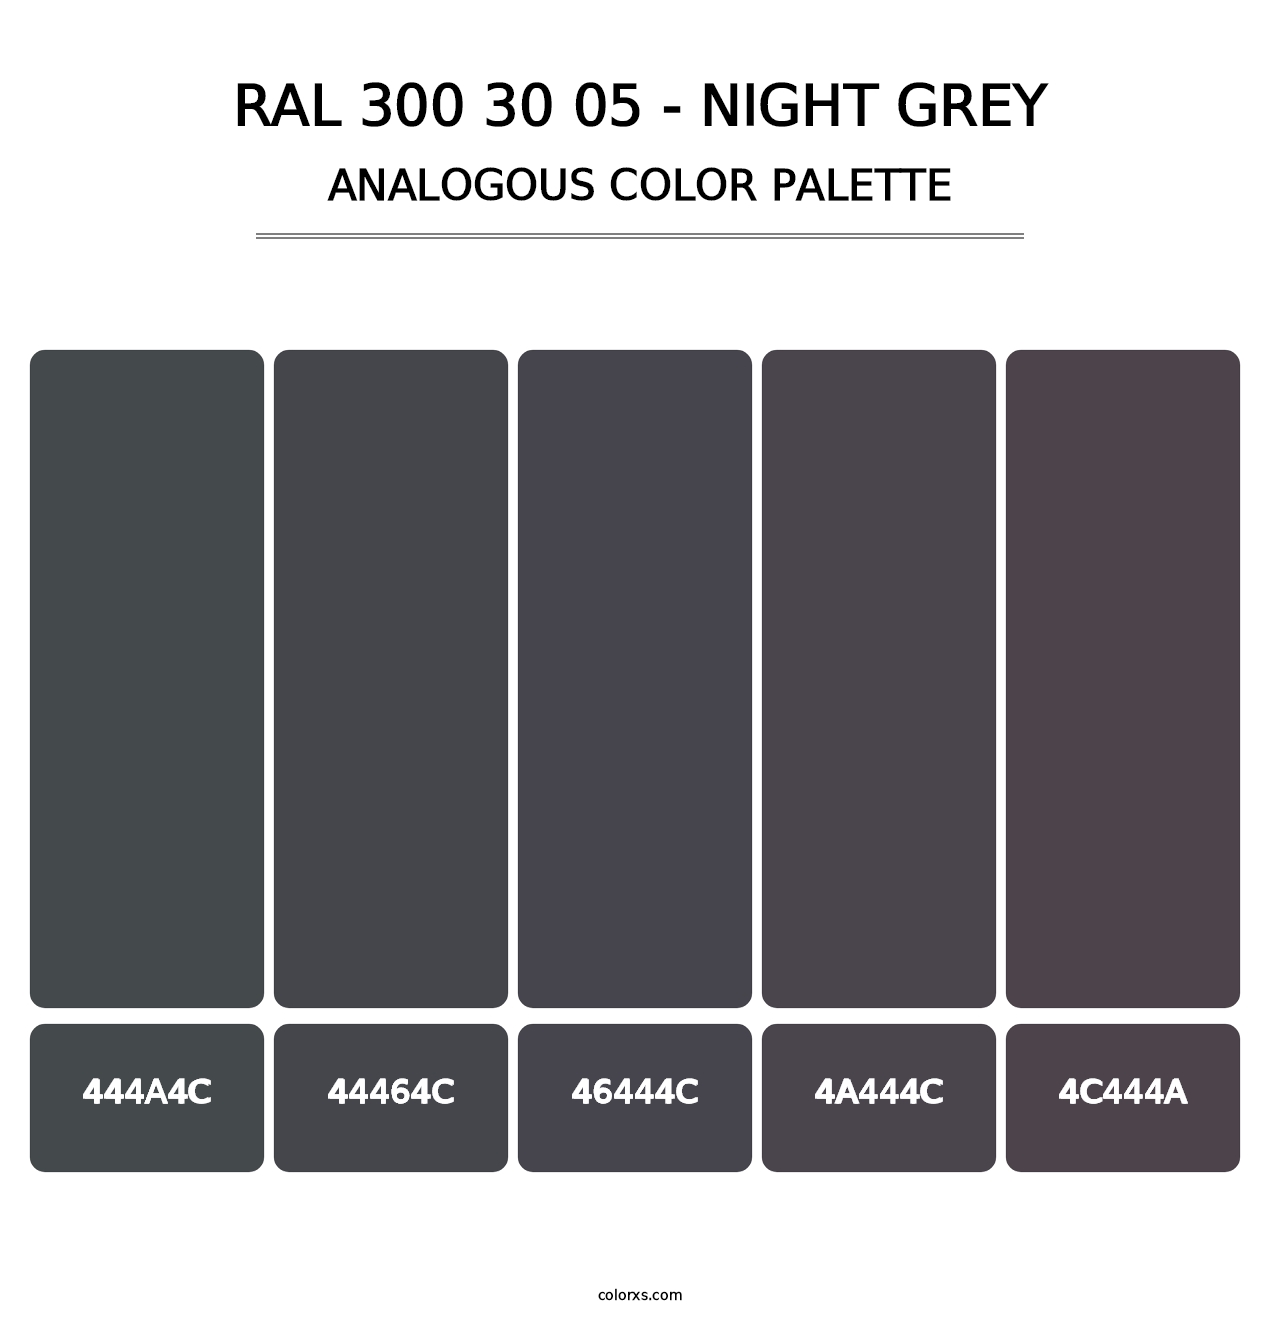 RAL 300 30 05 - Night Grey - Analogous Color Palette